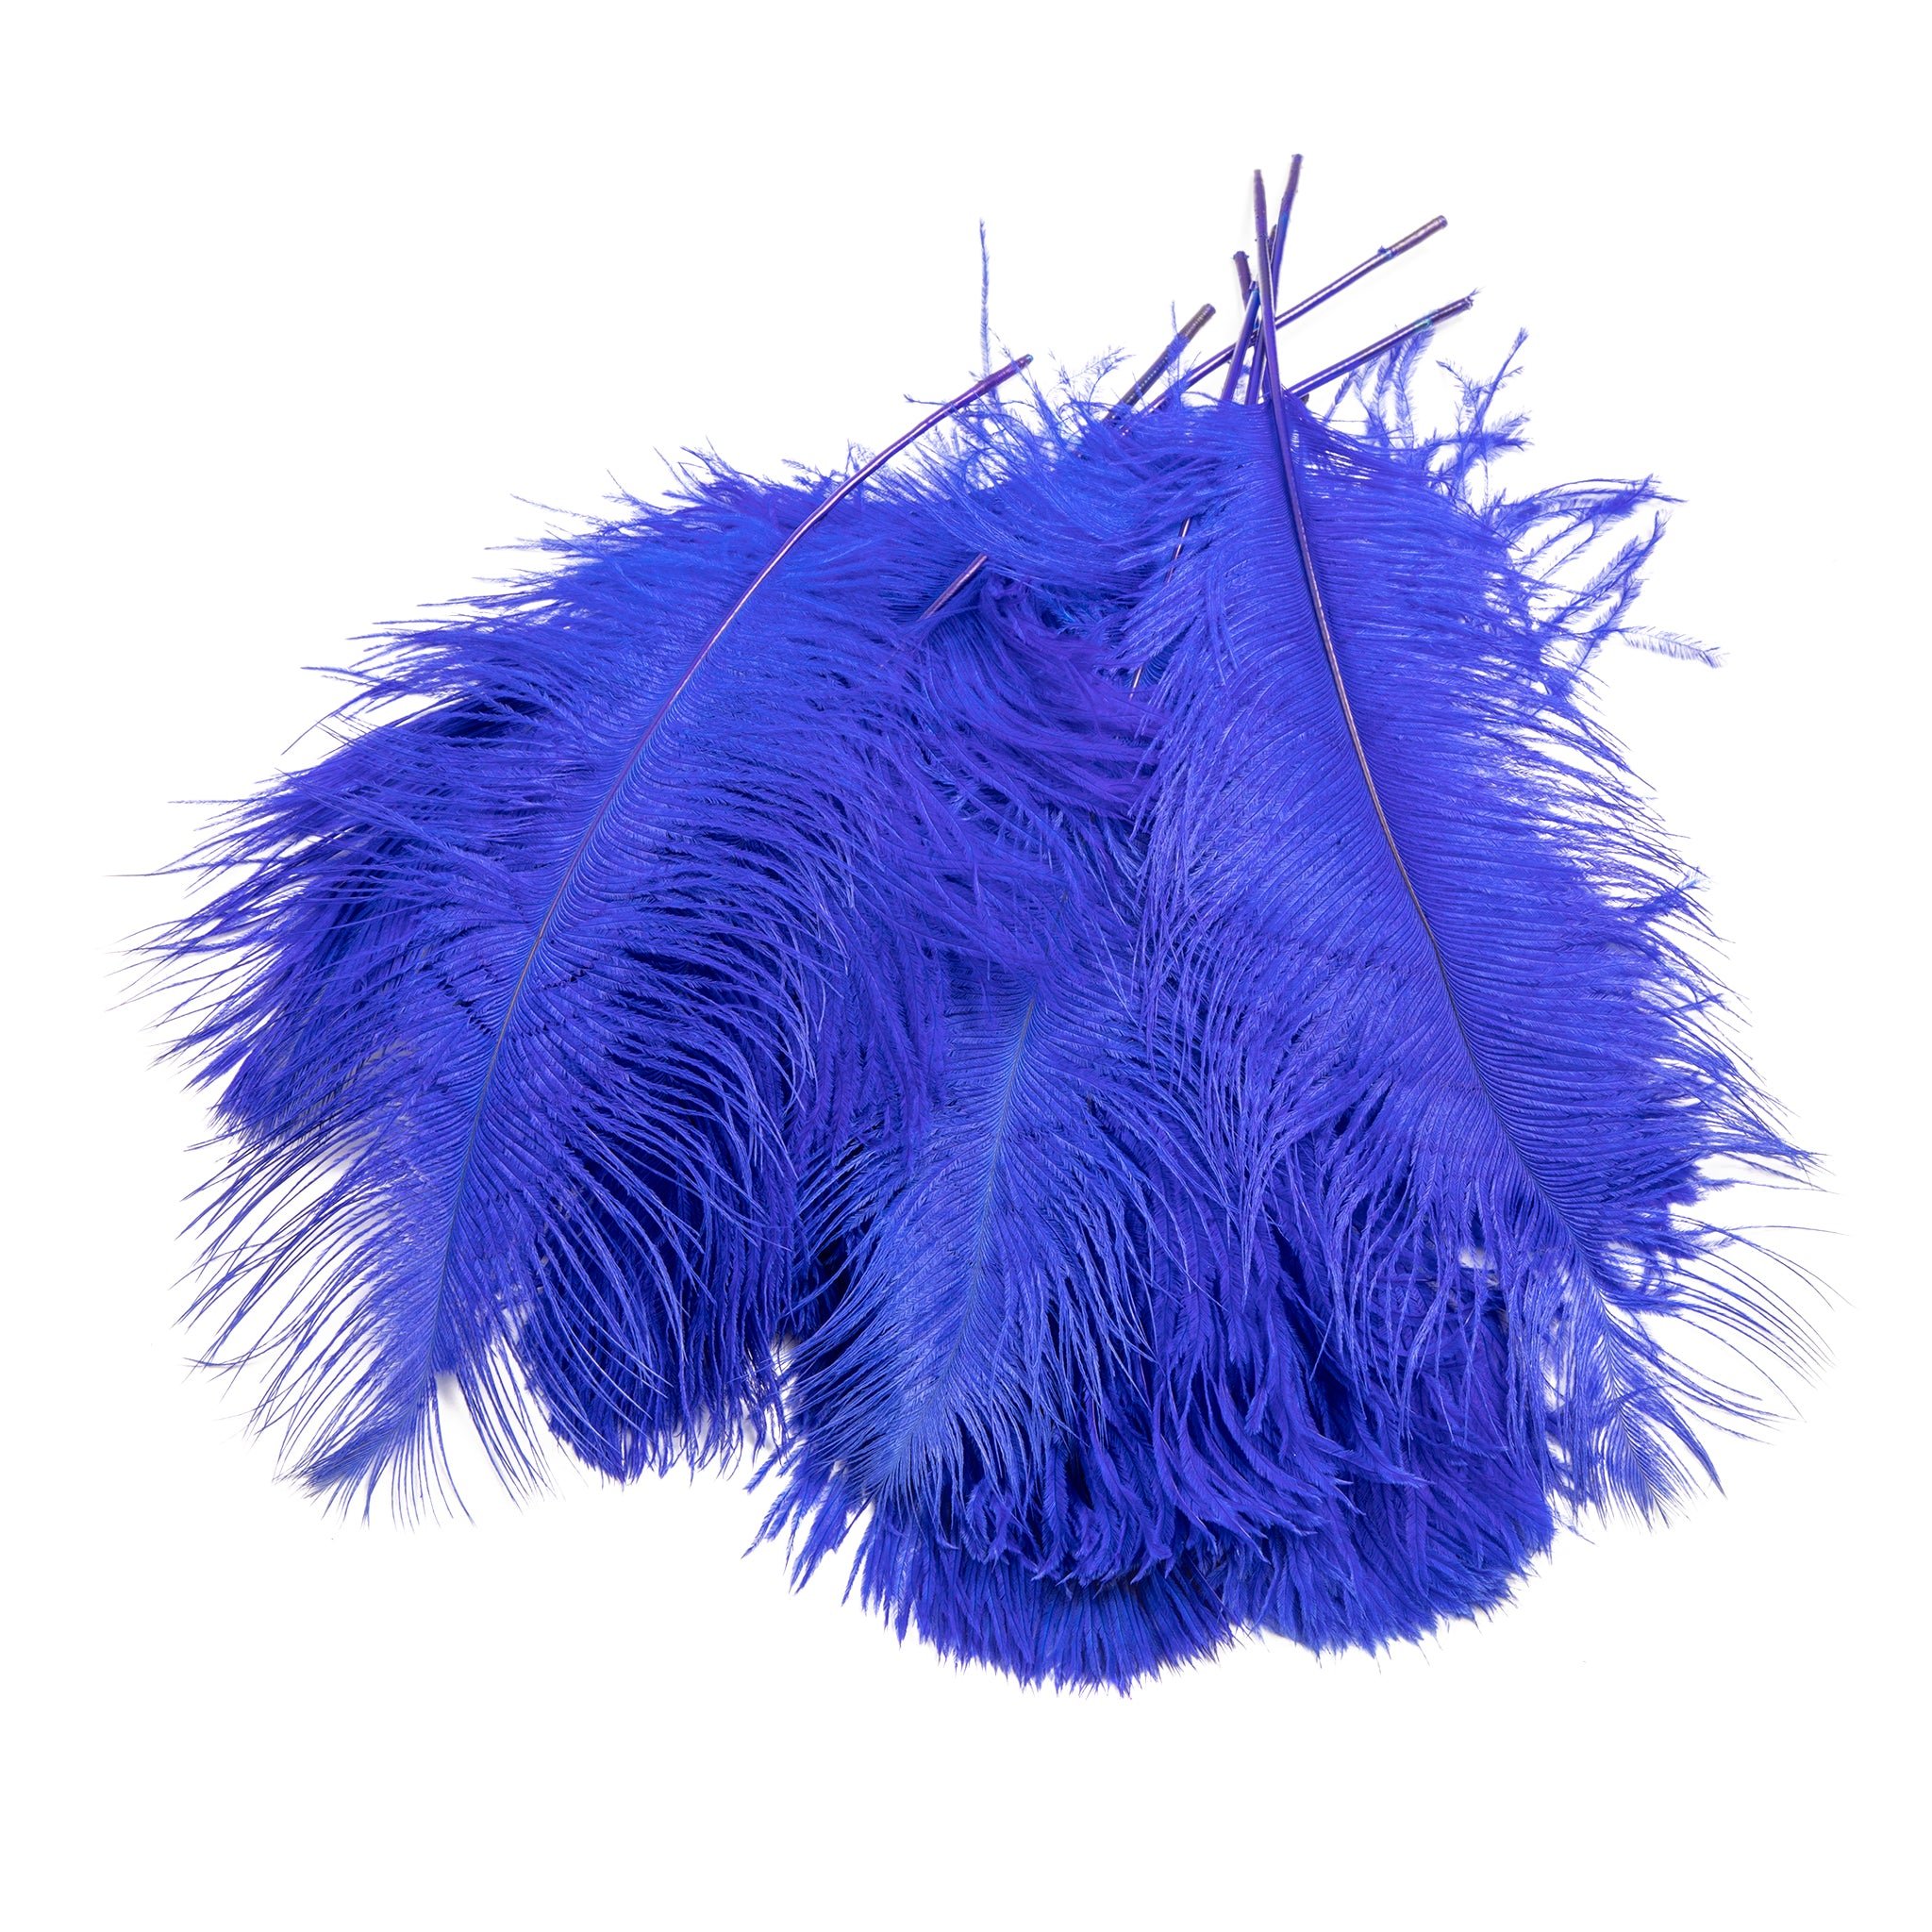 30 Pcs Large Natural Ostrich Feathers Bulk 16-18 Inch for